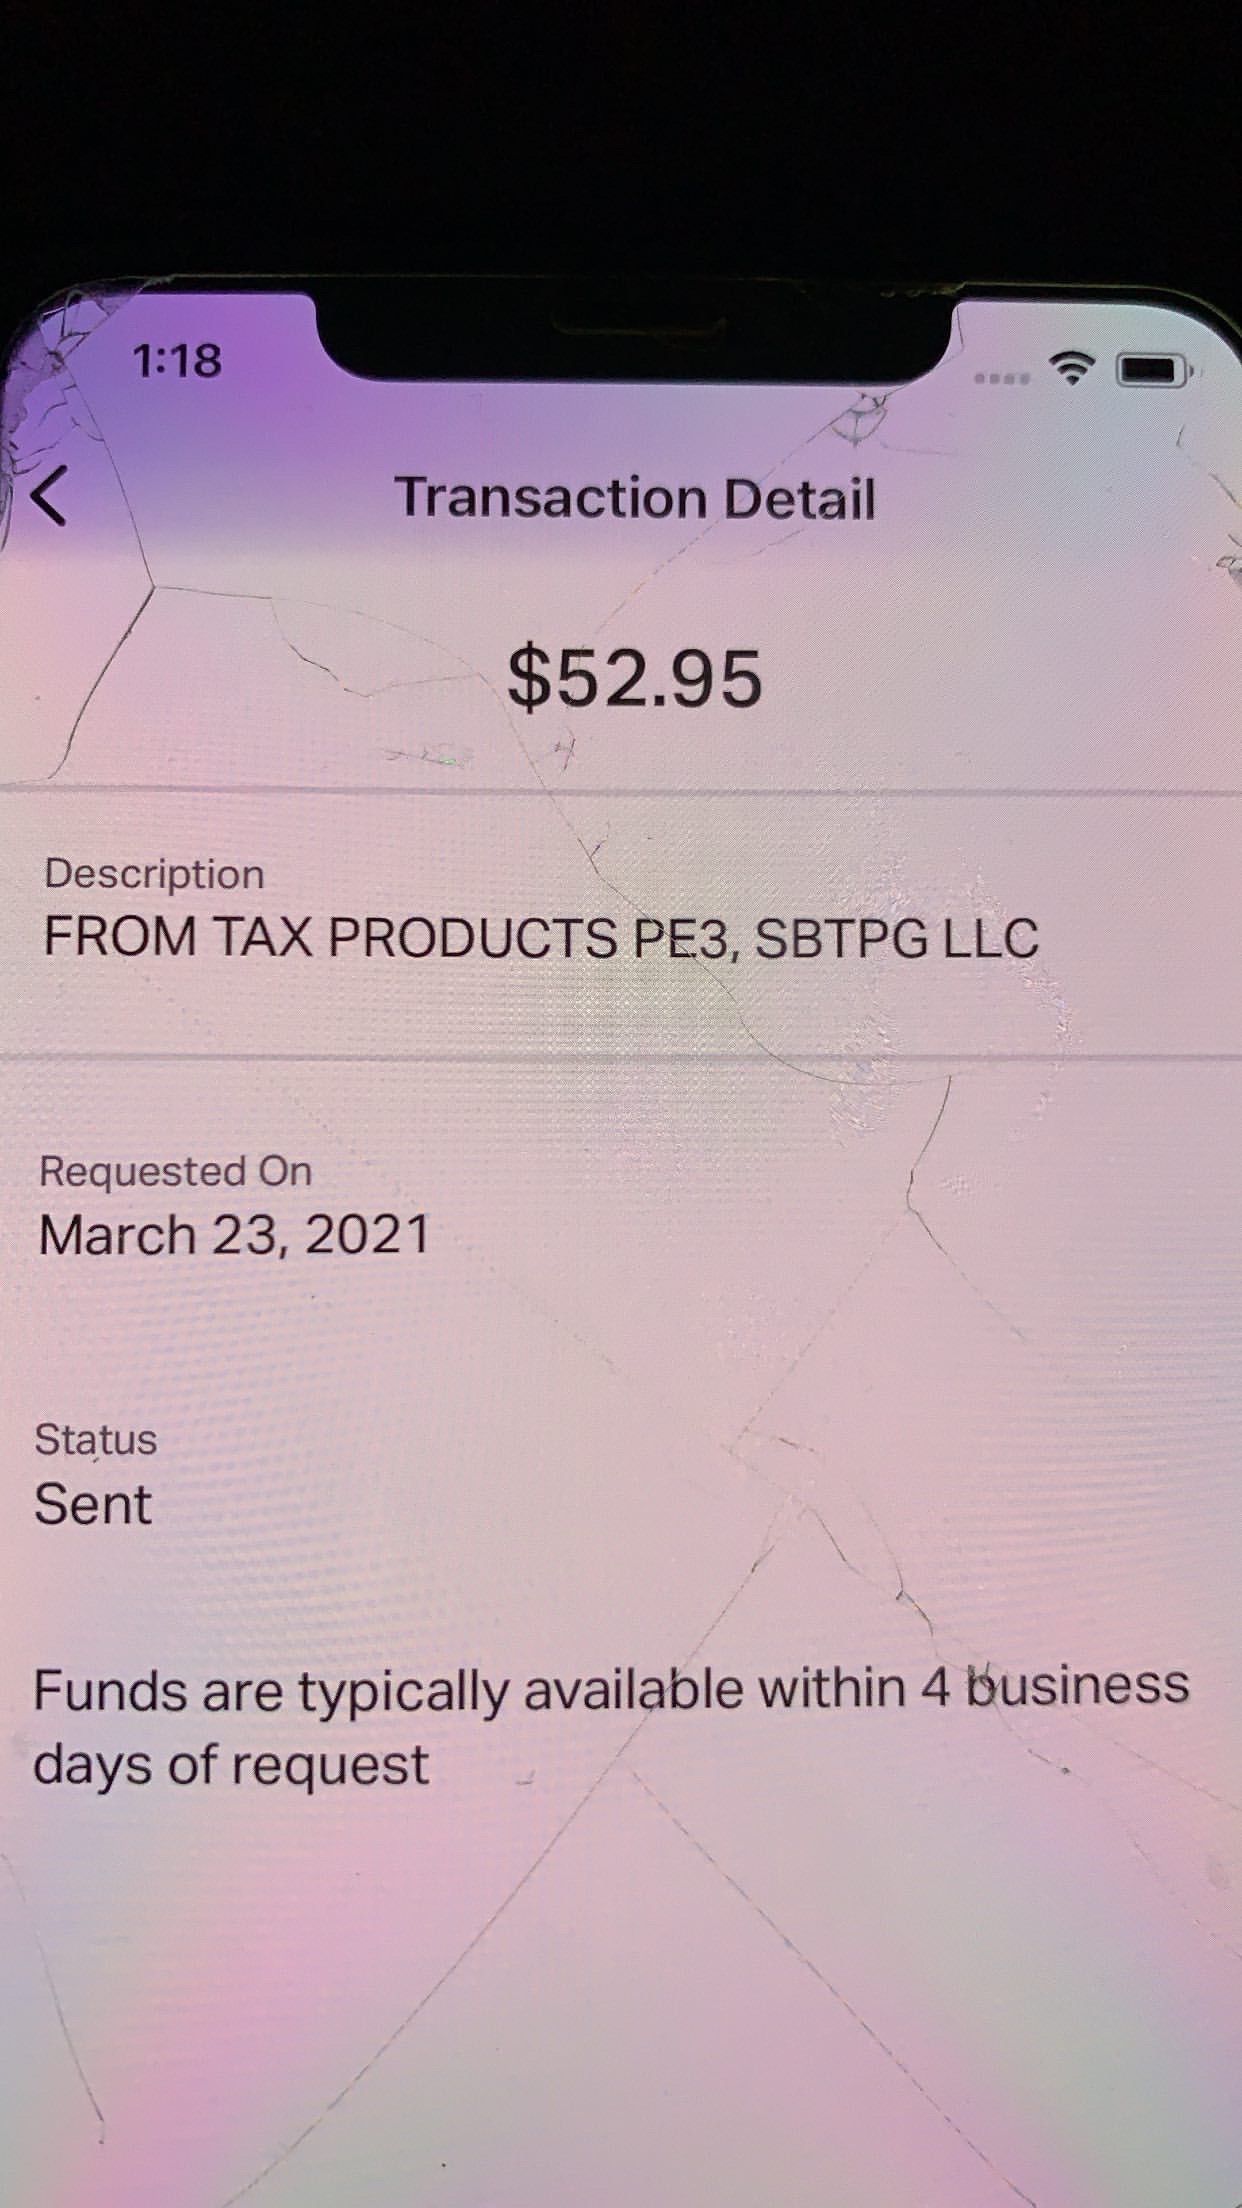 Solved: I got a direct deposit from TAX PRODUCTS PE3 SBTPG LLC, but according to turbo tax, I haven't received my tax return yet. what was this deposit for?